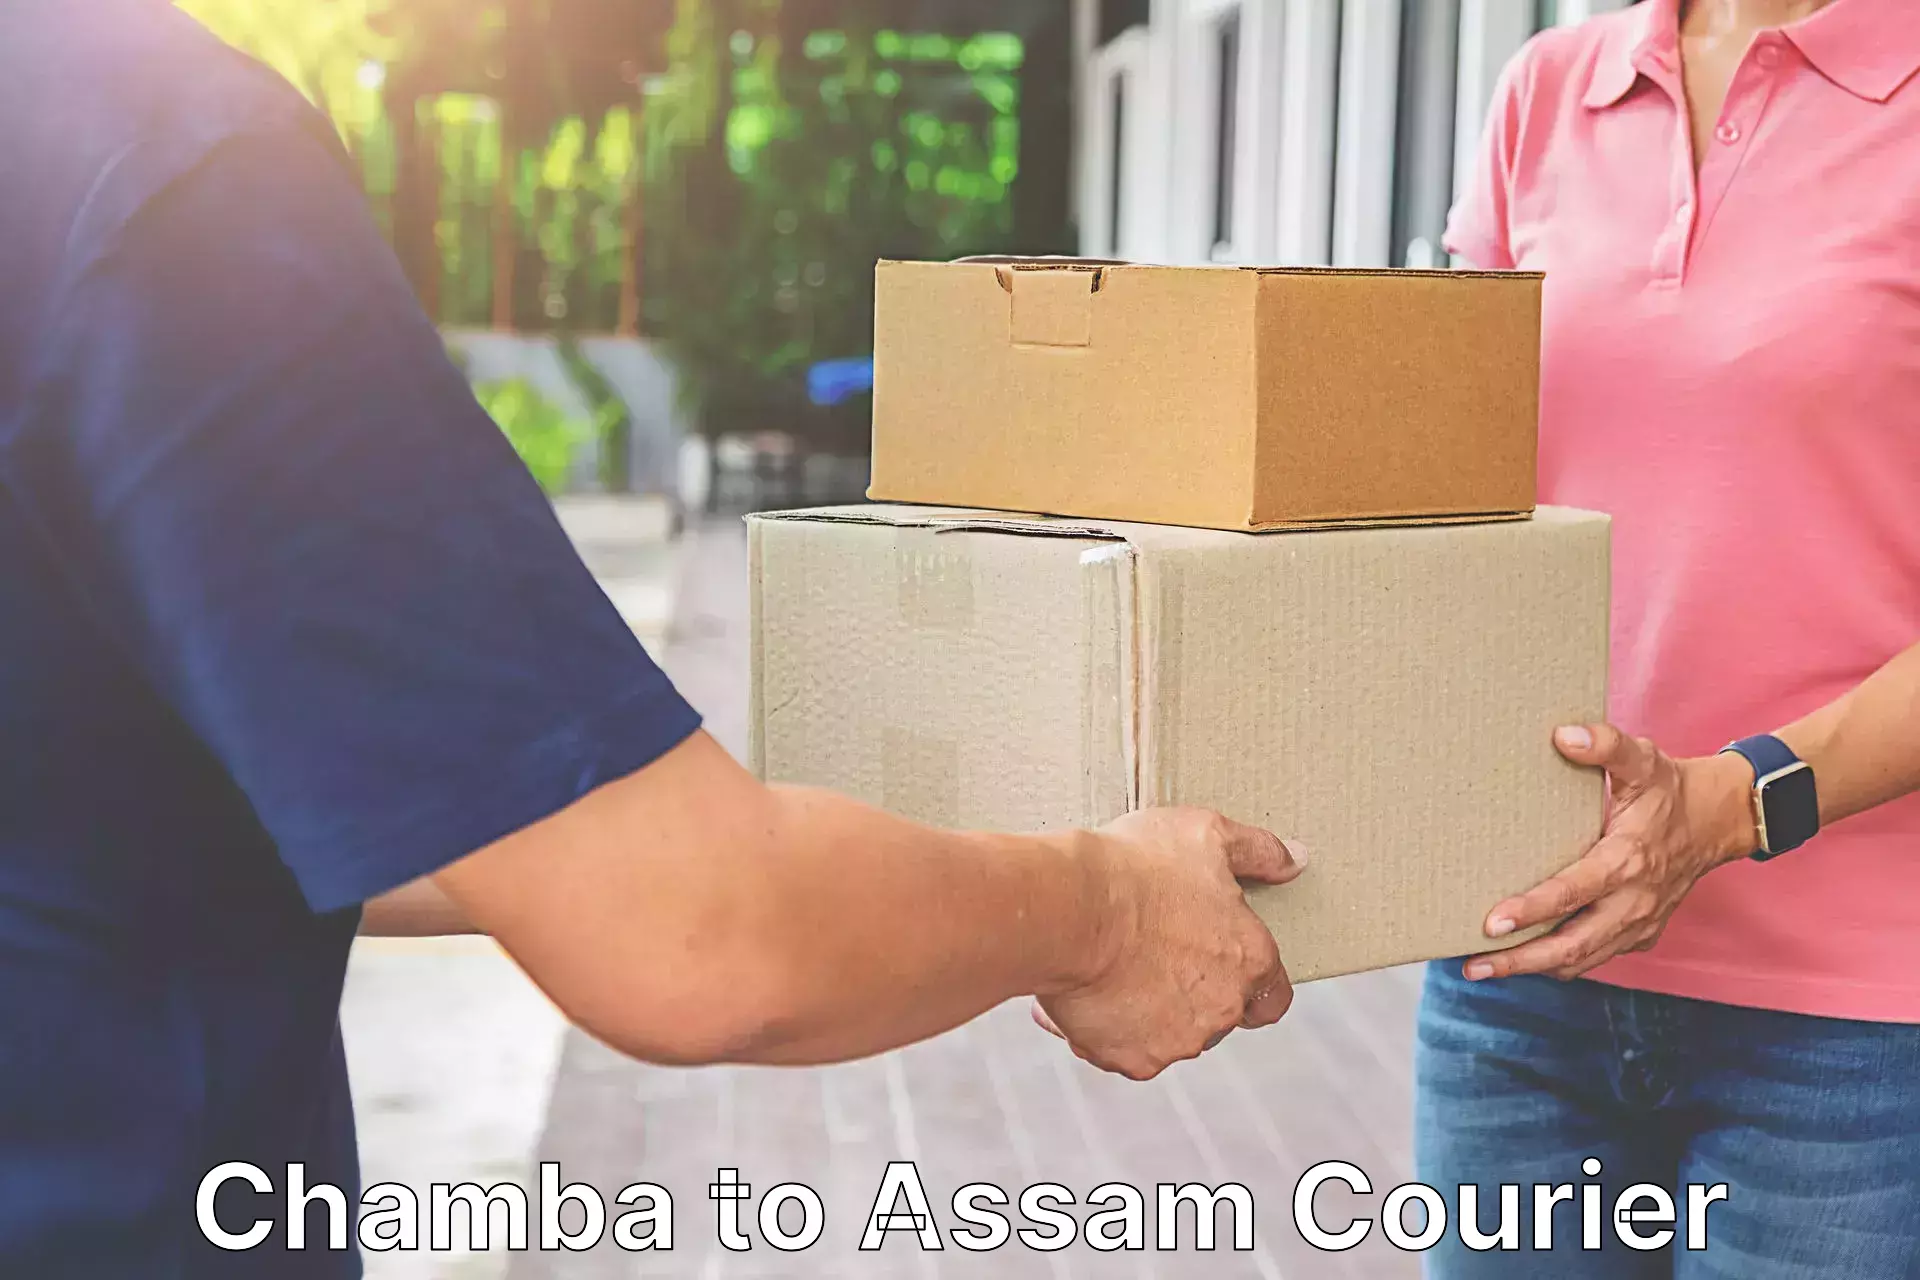 Reliable delivery network Chamba to Lala Assam